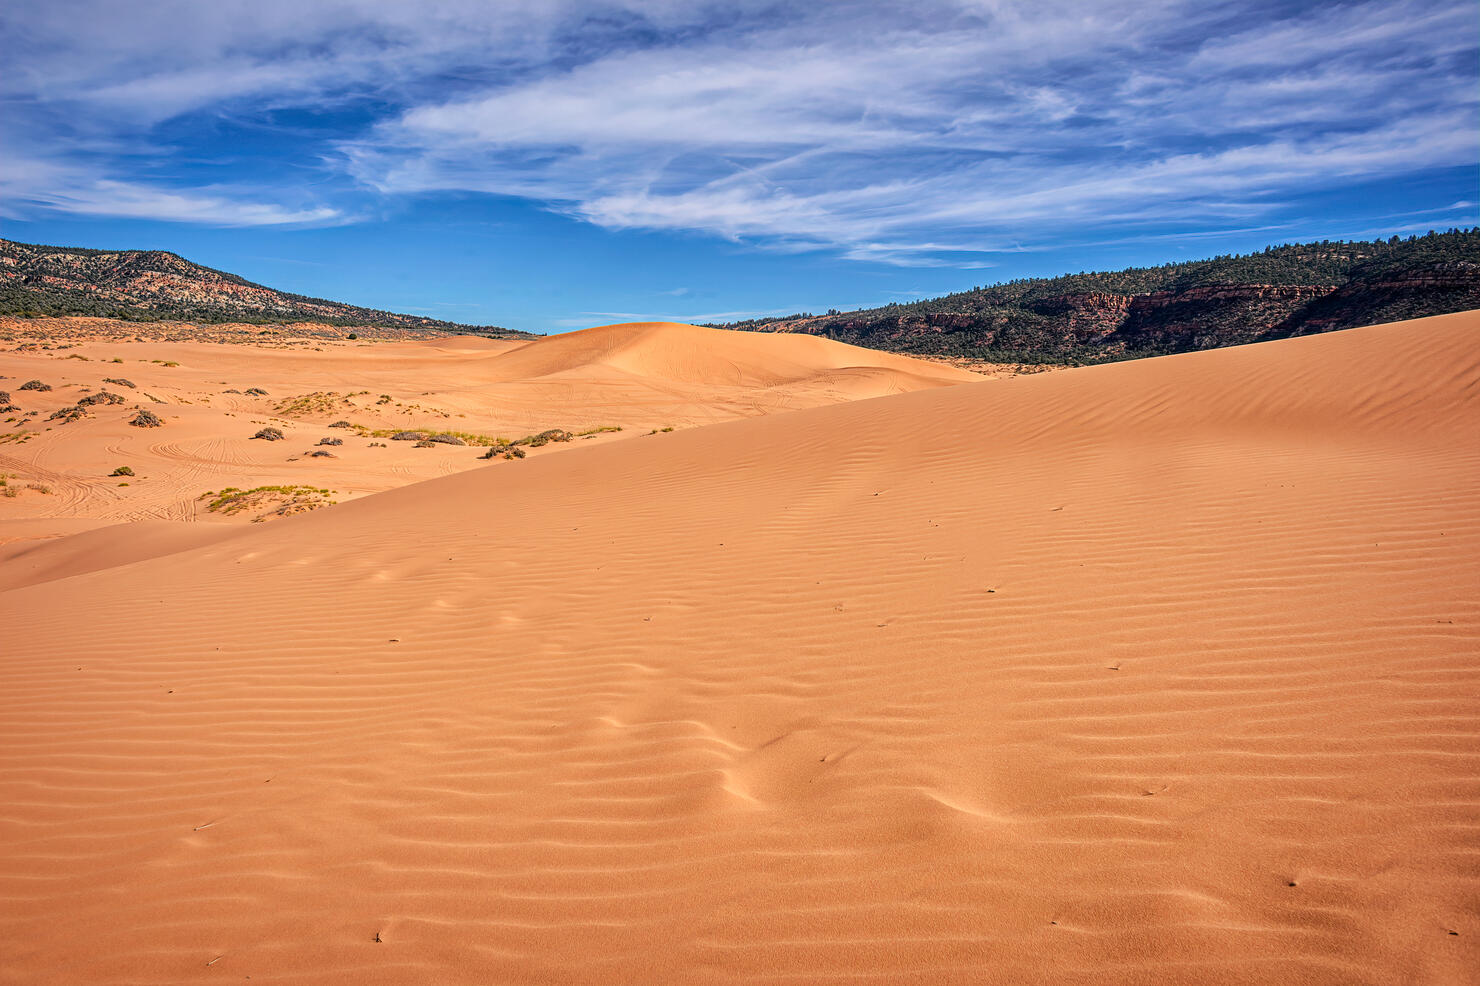 Footprints in the pink coral sand dunes in Coral Pink Sand Dunes State Park, Utah, USA